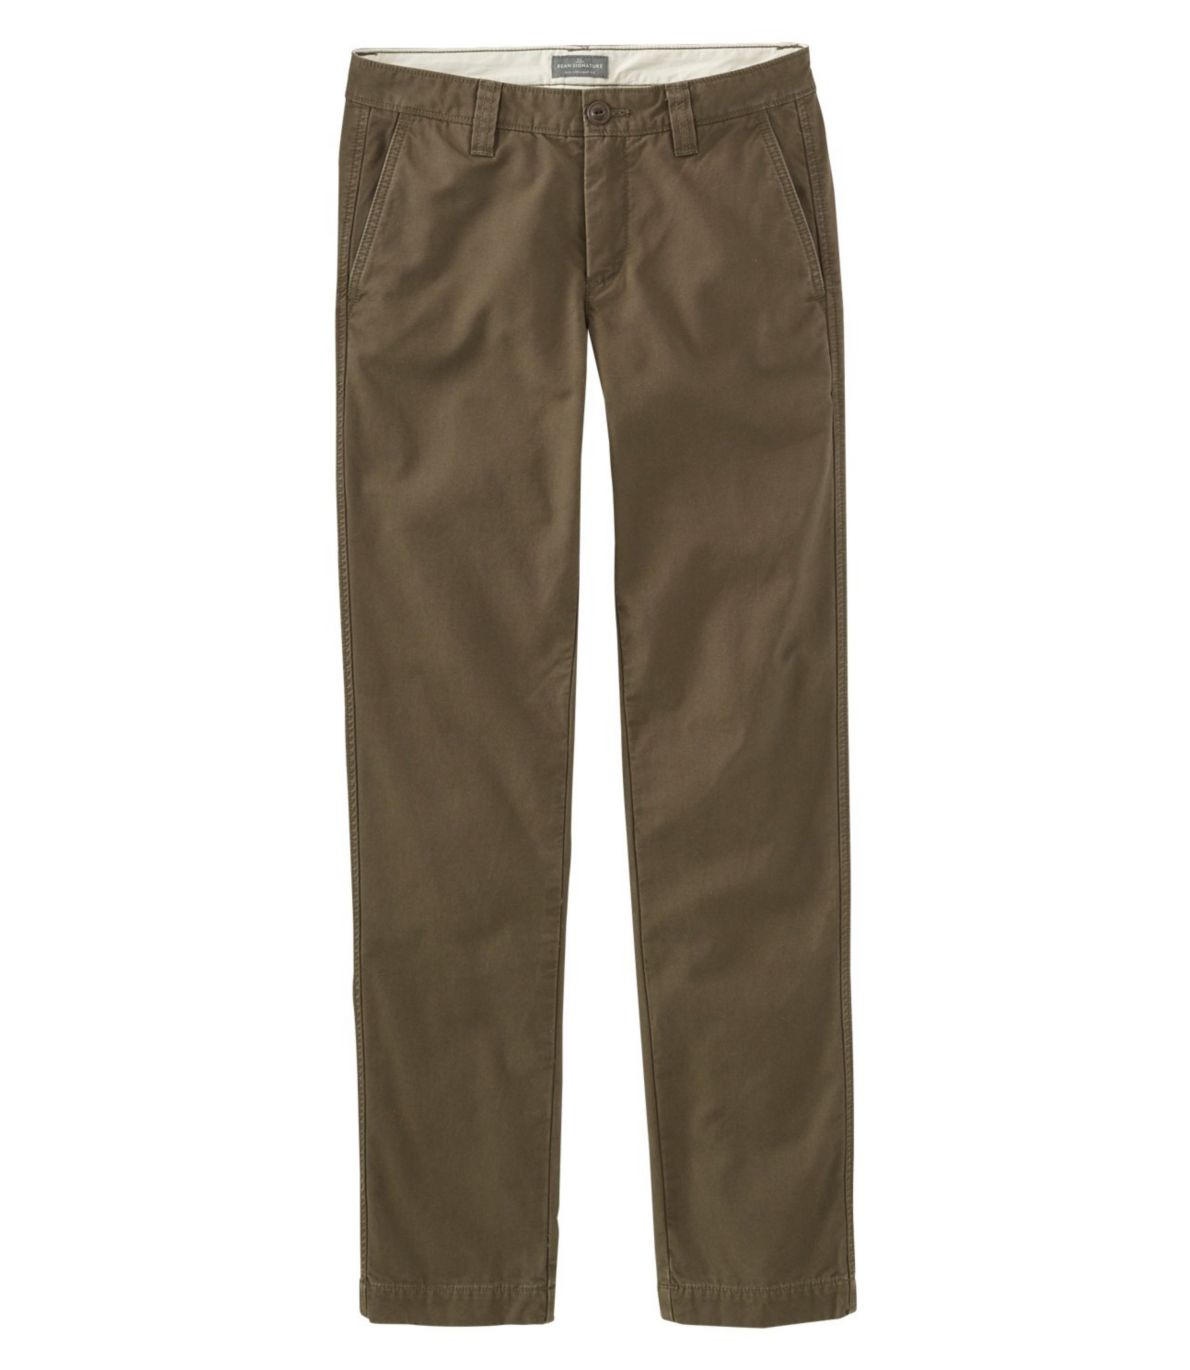 Signature Washed Canvas Cloth Pants, Slim Straight Lined